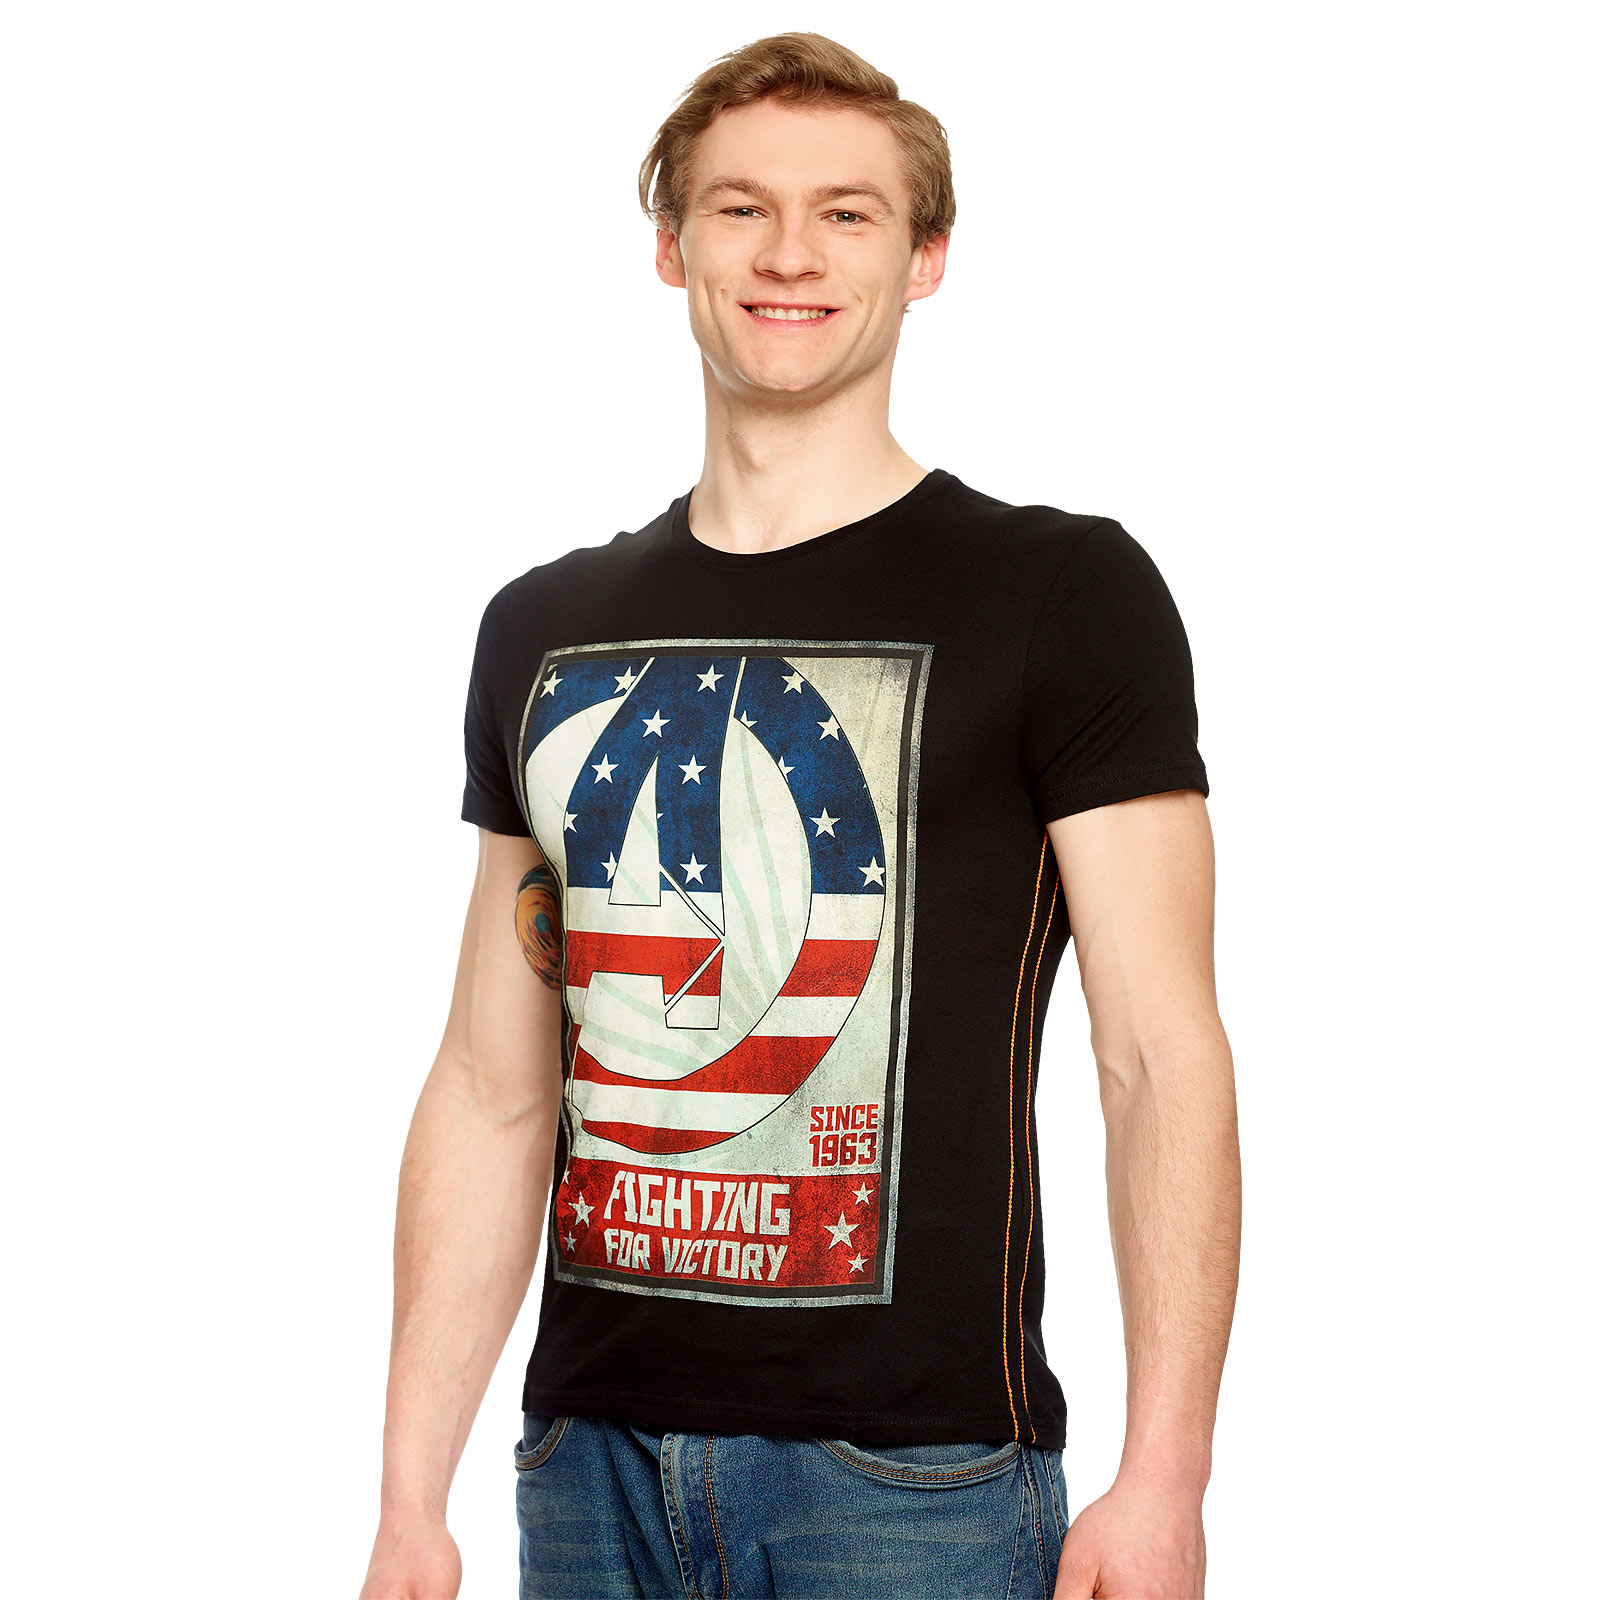 Avengers - Fighting for Victory T-Shirt black